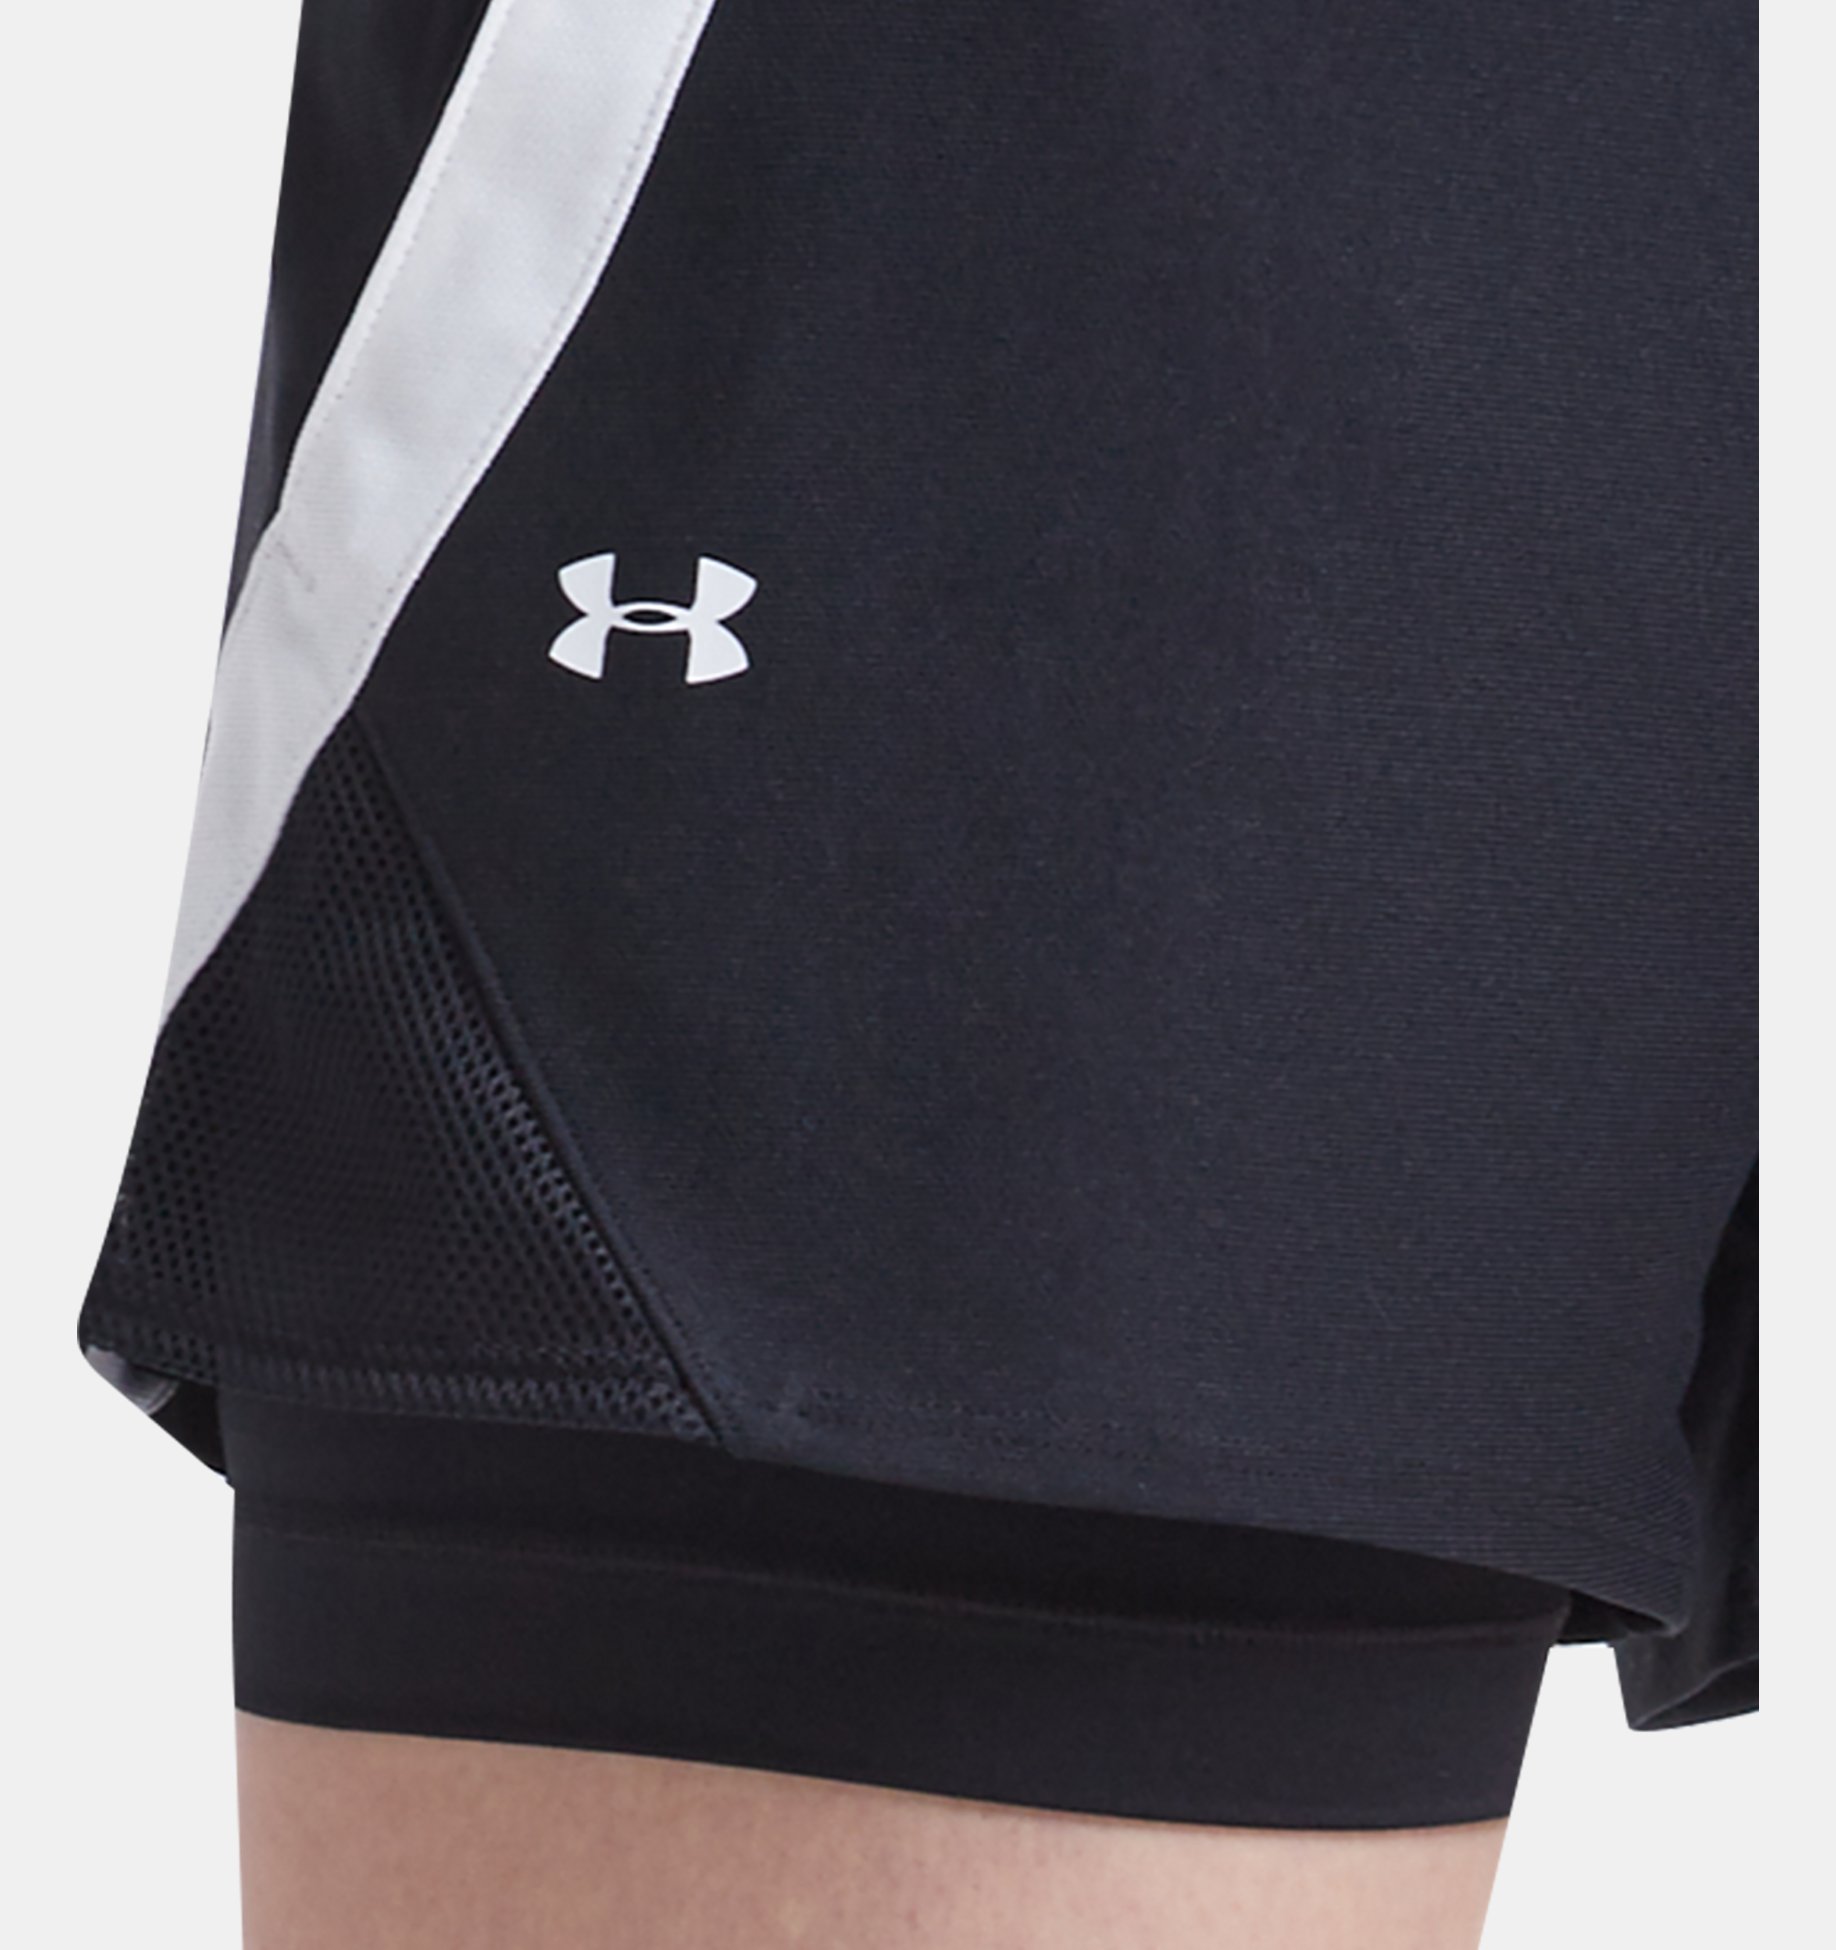 Under Armour Women's UA Play Up 2.0 Shorts Size L 1362517-411 - Mightnight  Navy